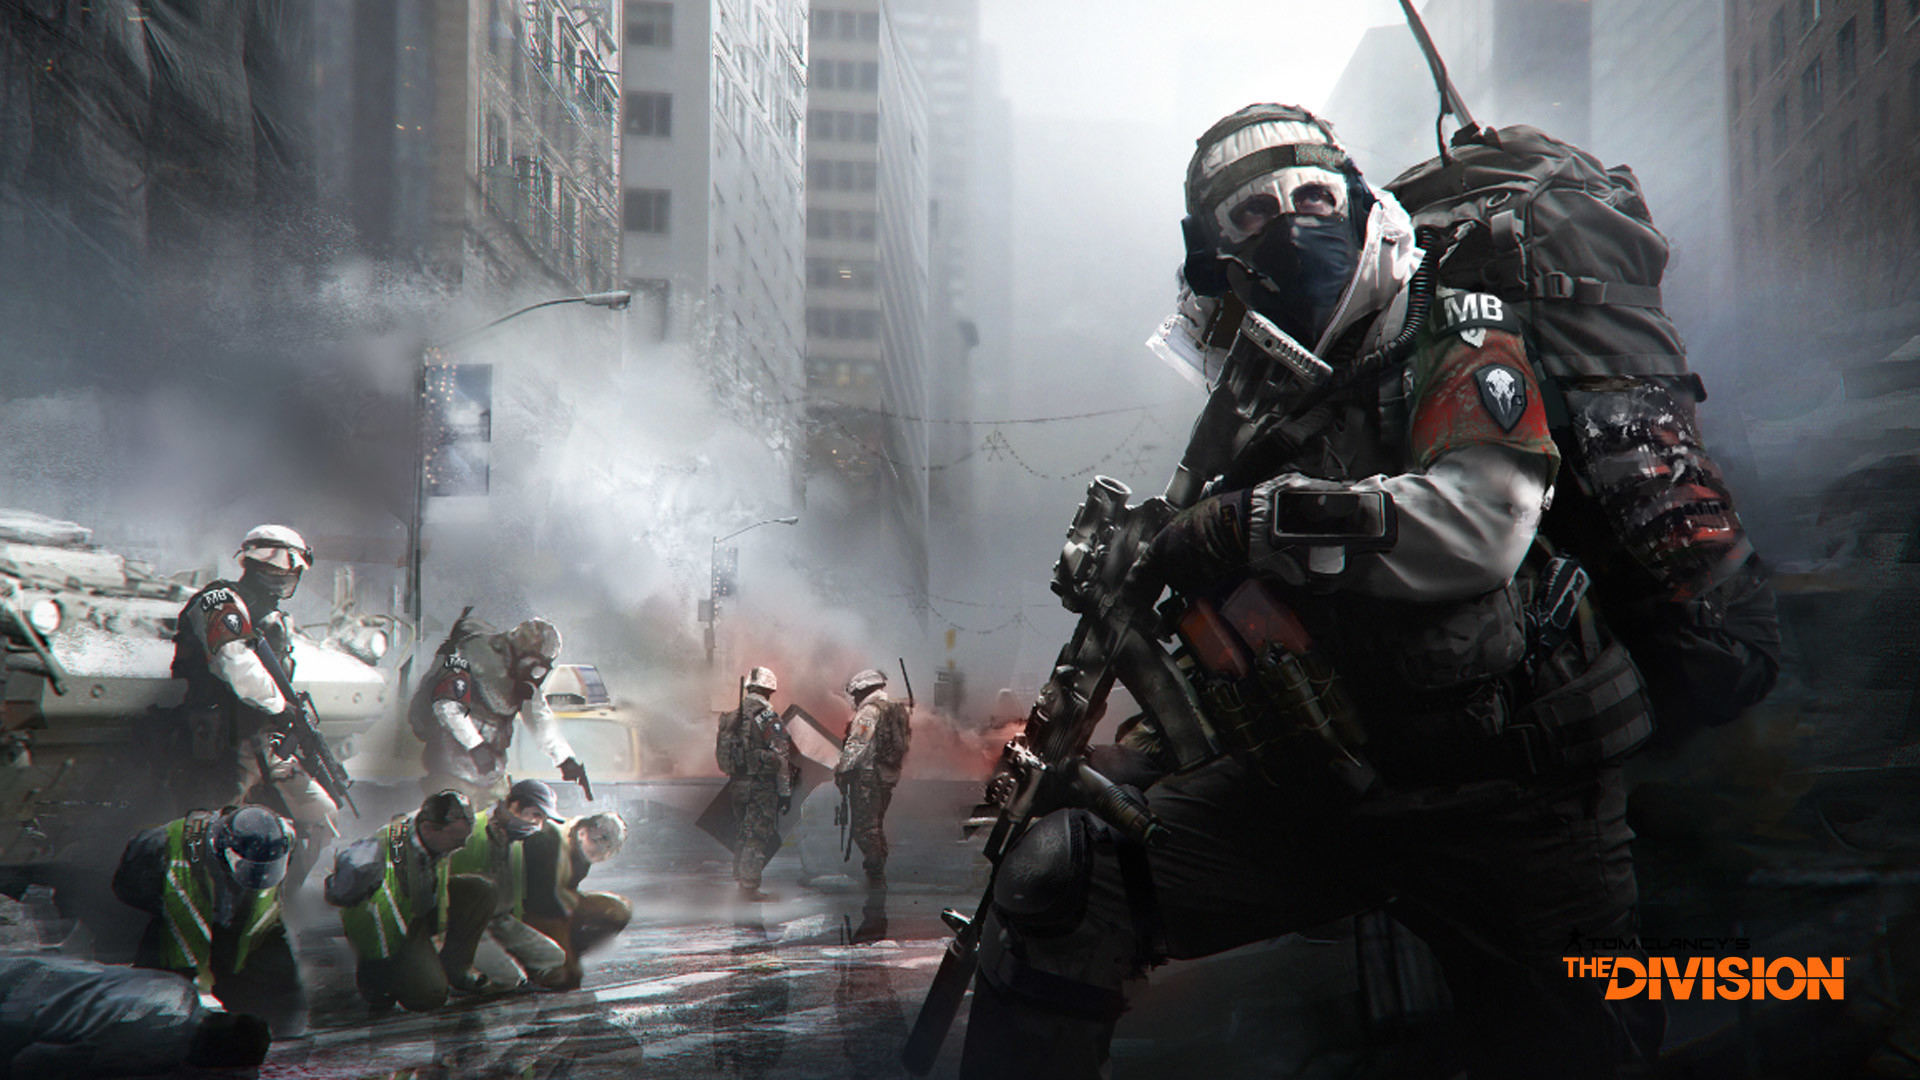 1920x1080 Free The Division Wallpaper in 